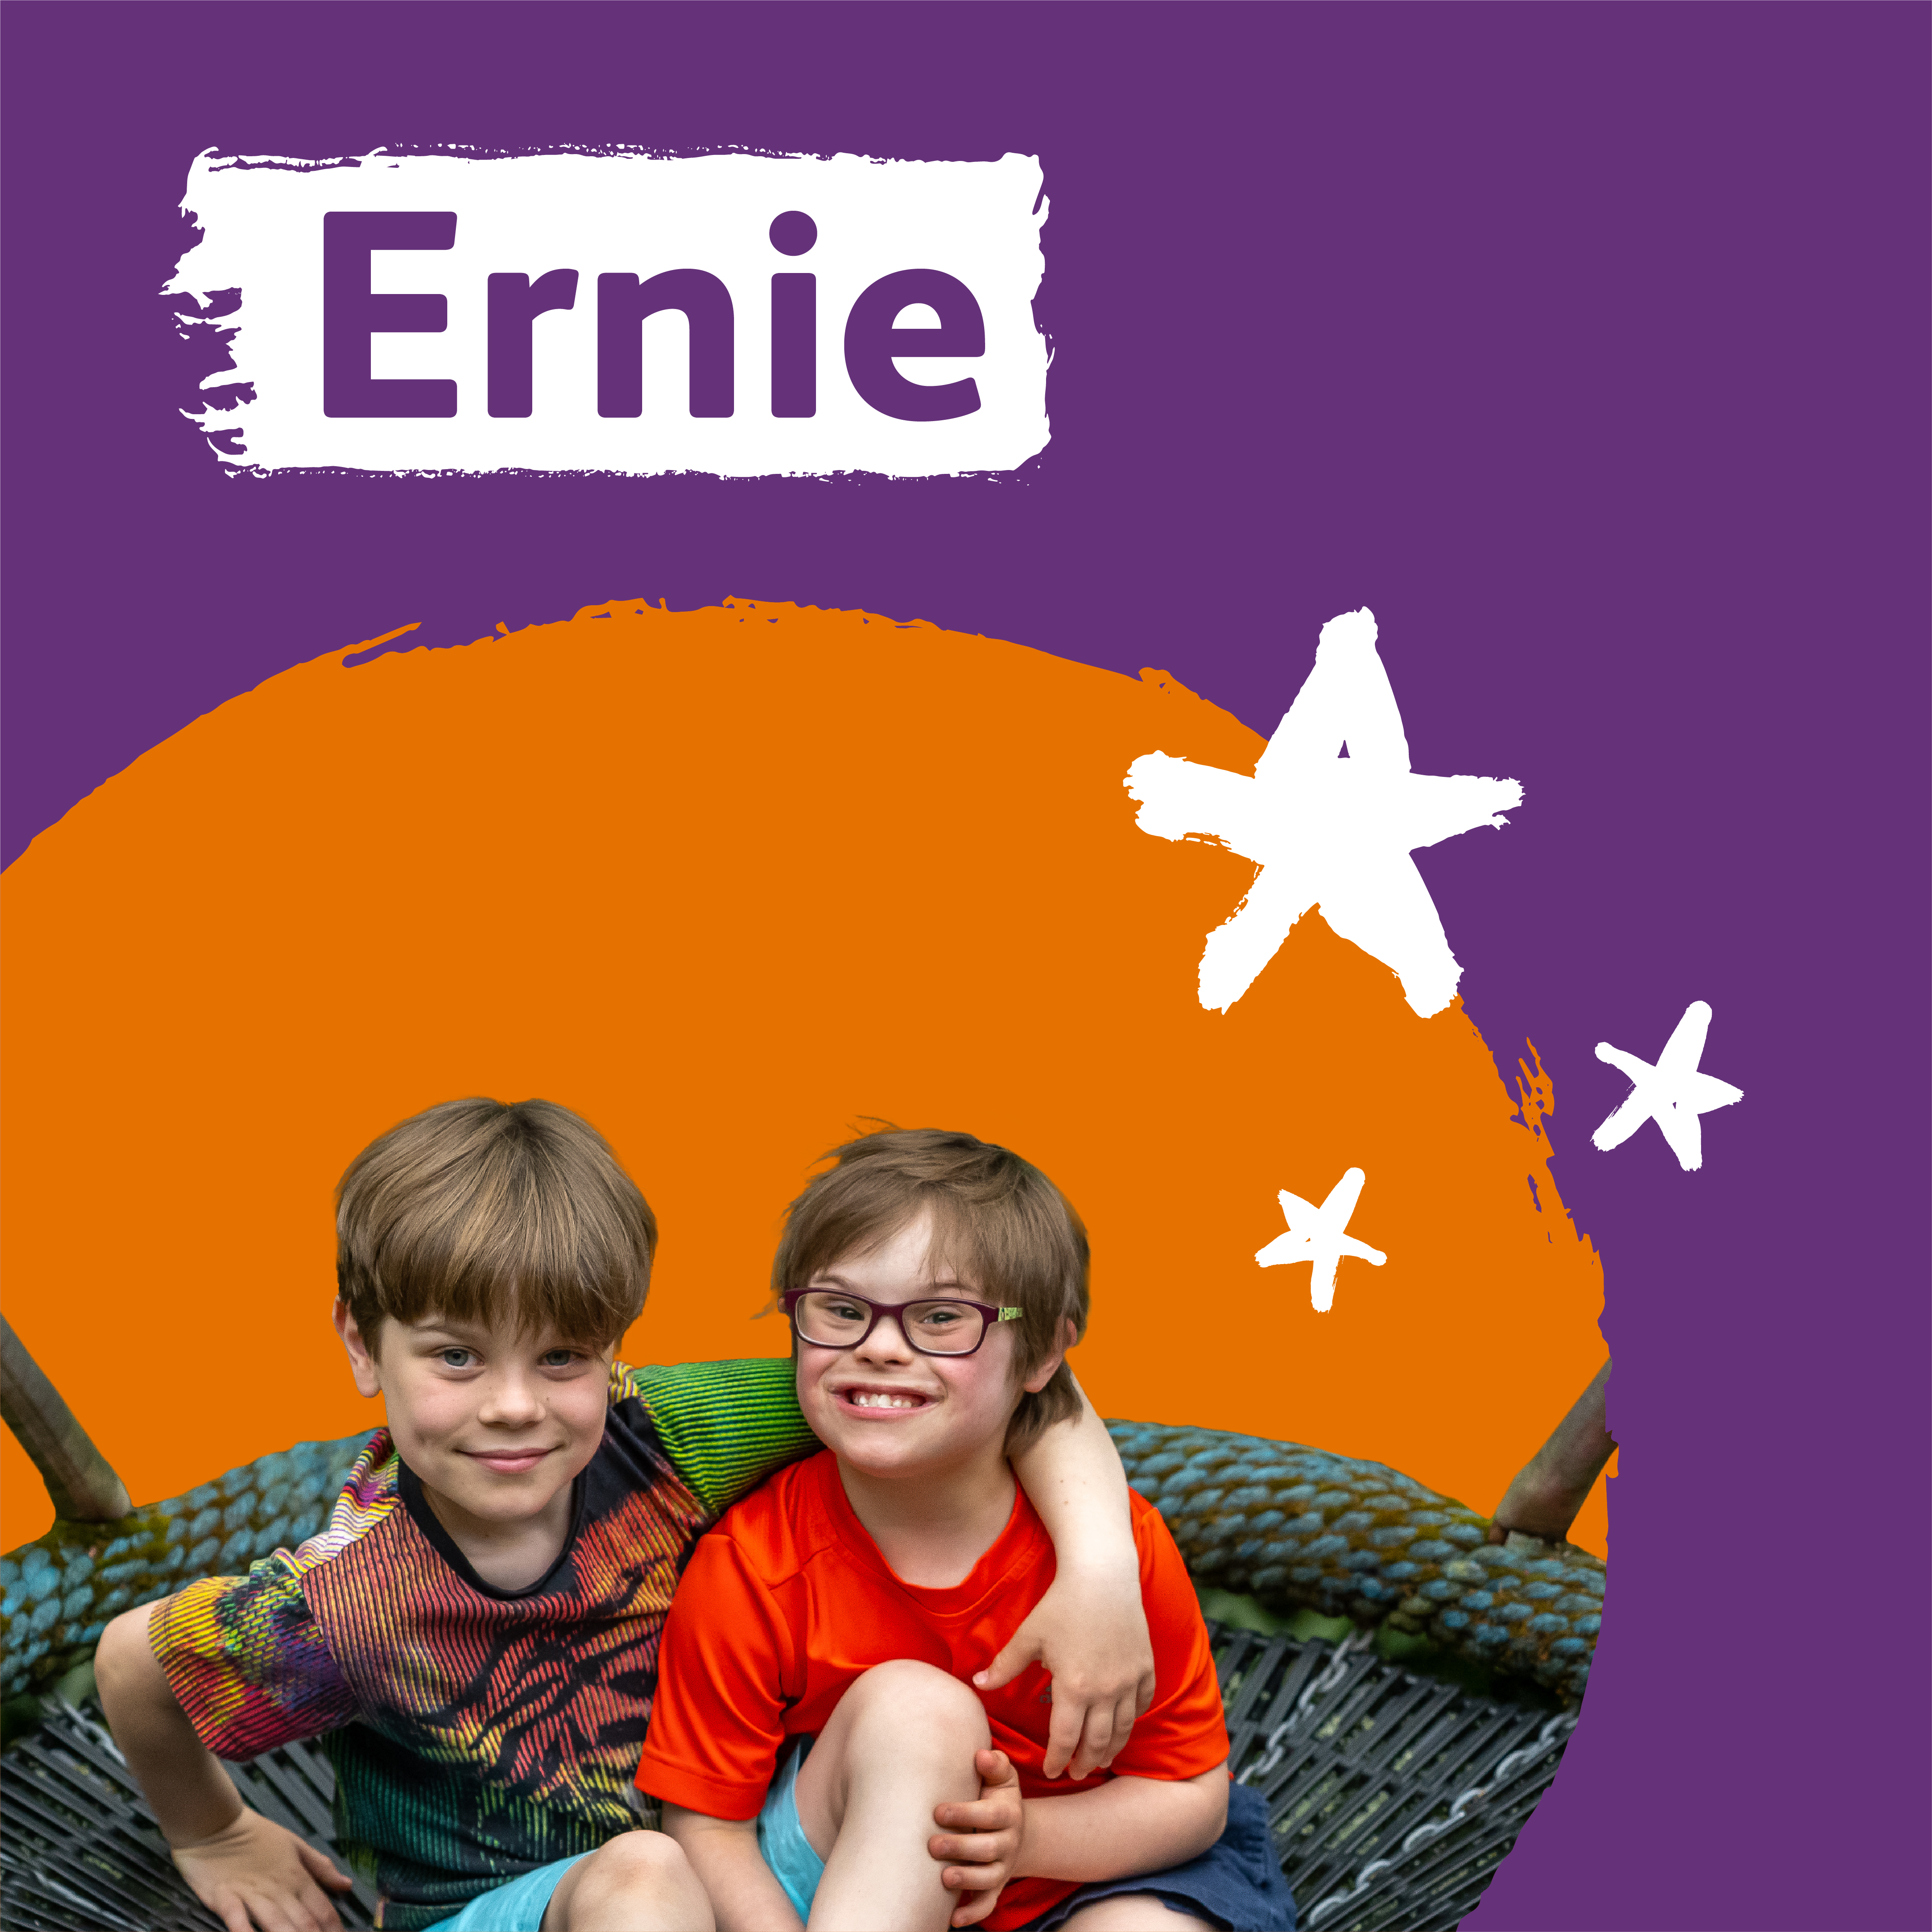 Ernie - Two boys sit on a swing with their arms round each other. The name Ernie is written above them.